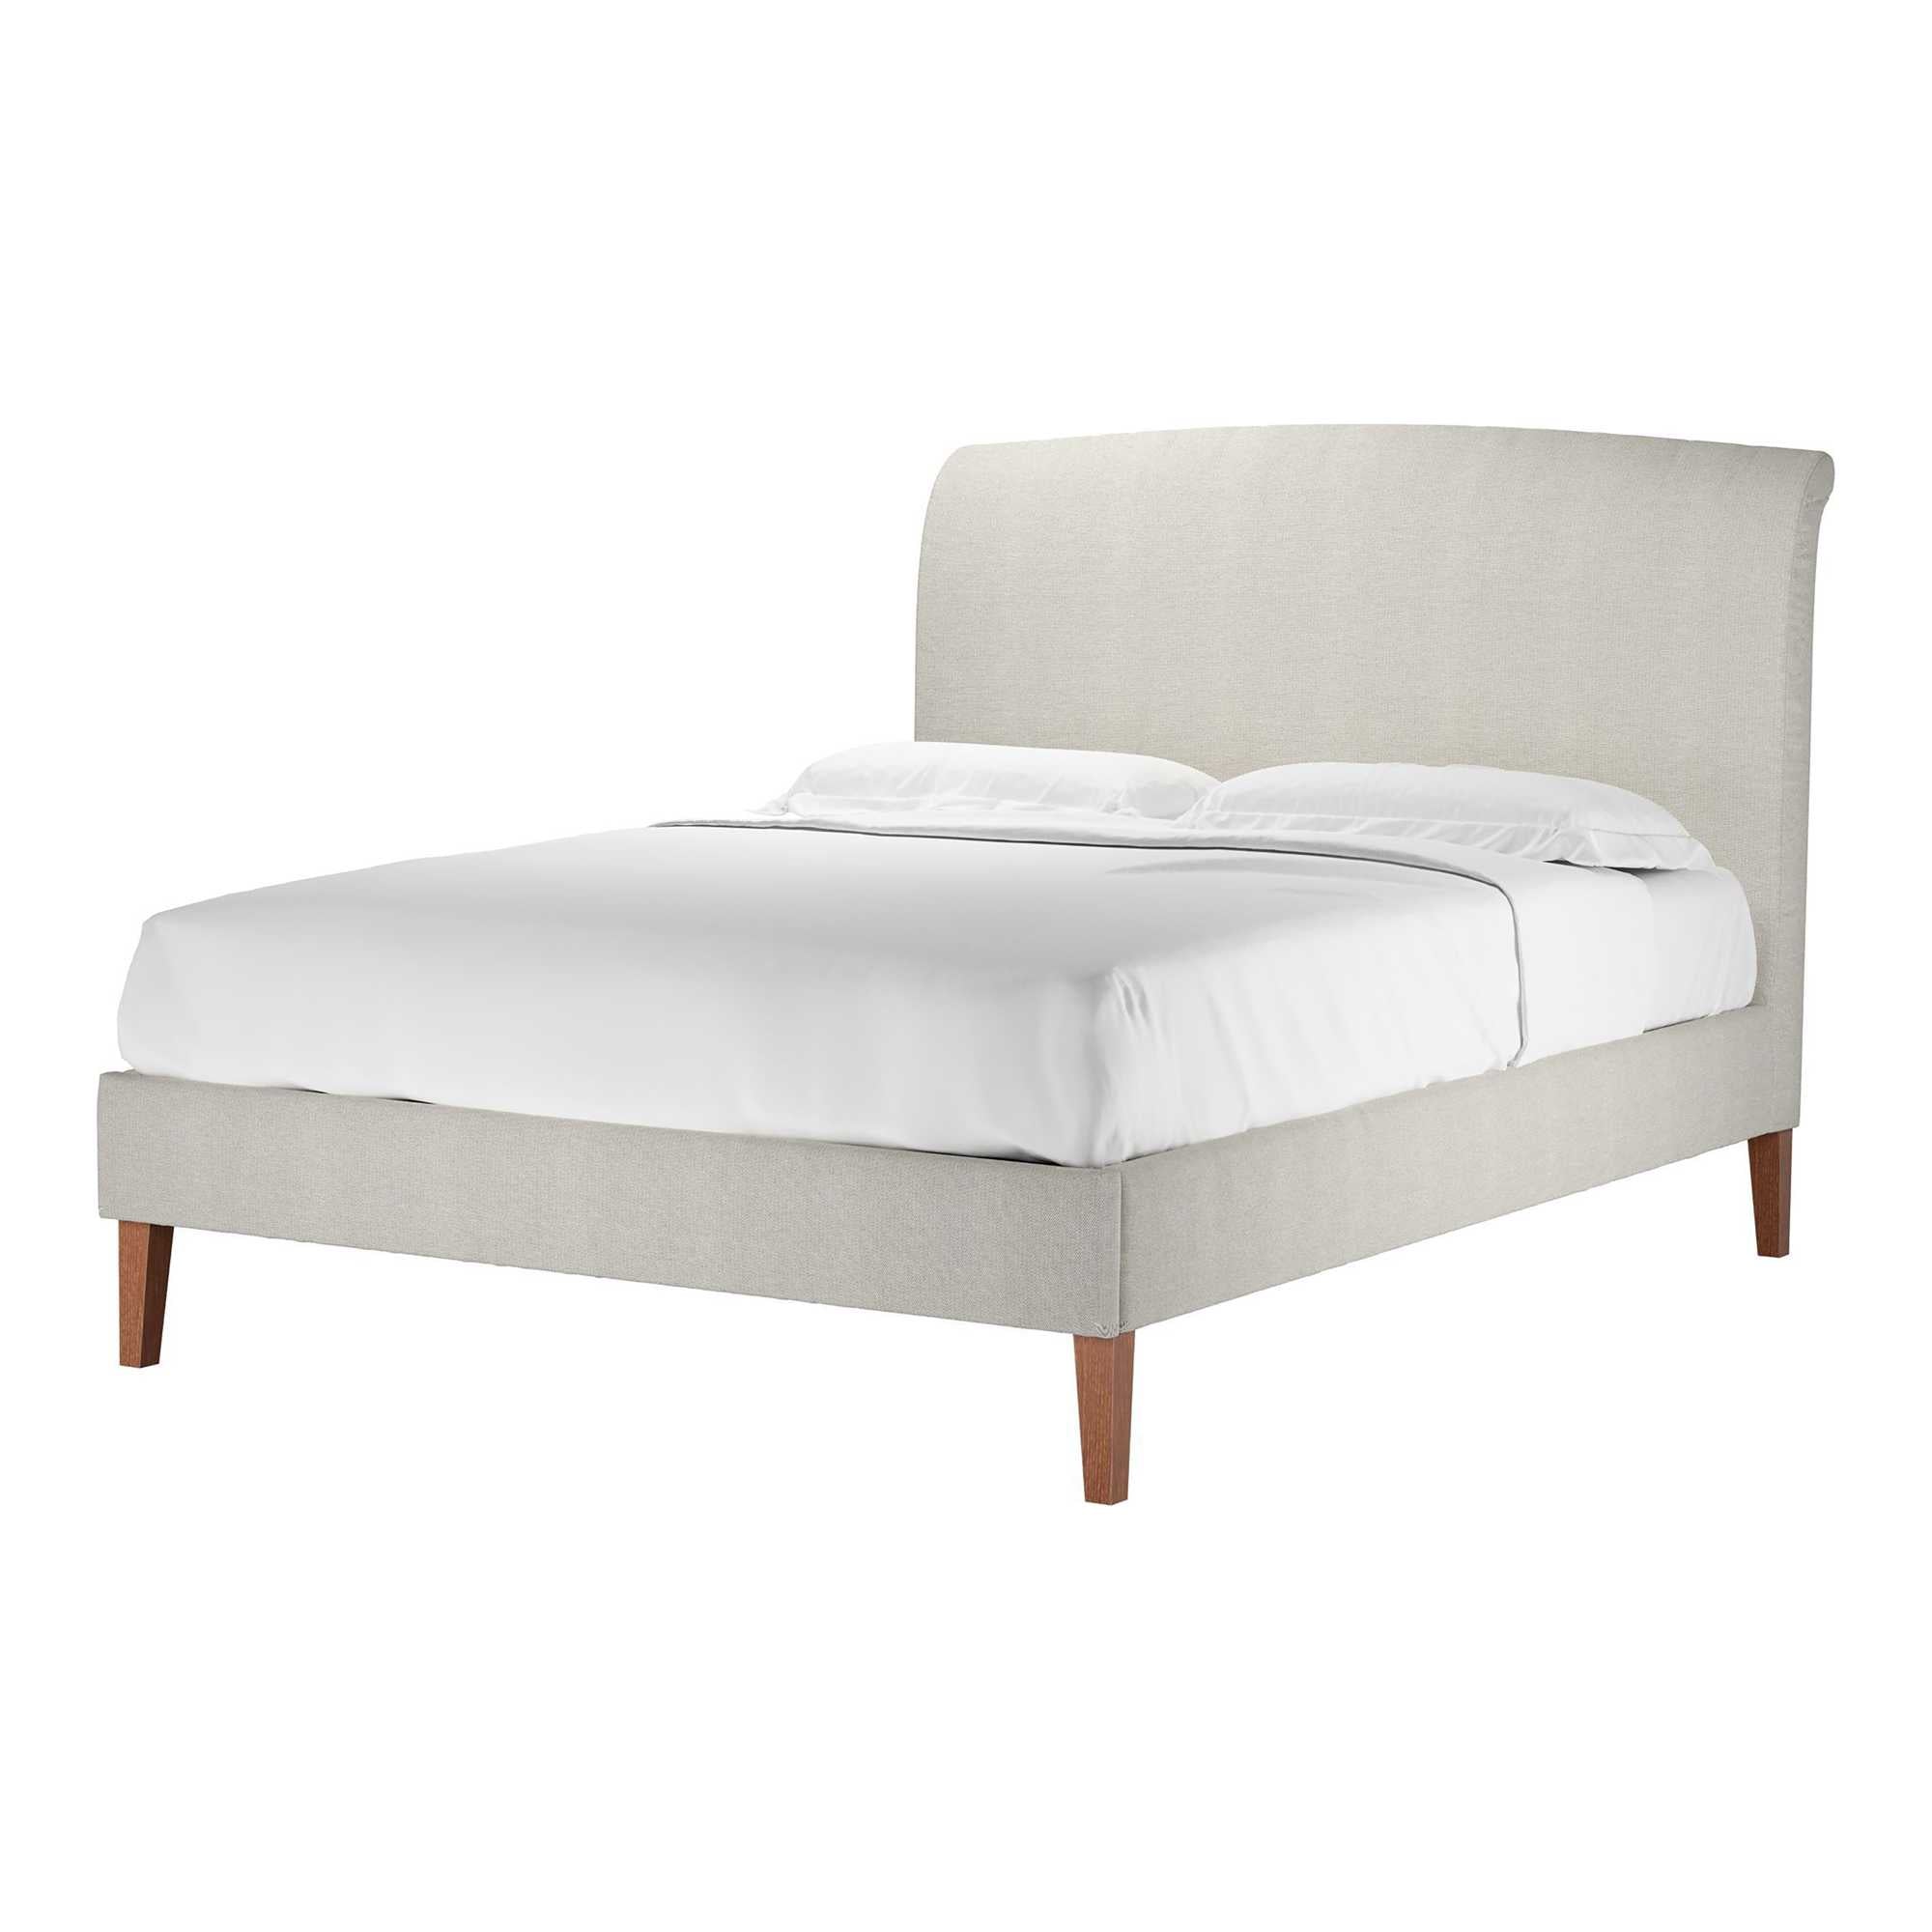 Thea Clay House Basket Weave Bed - King Size